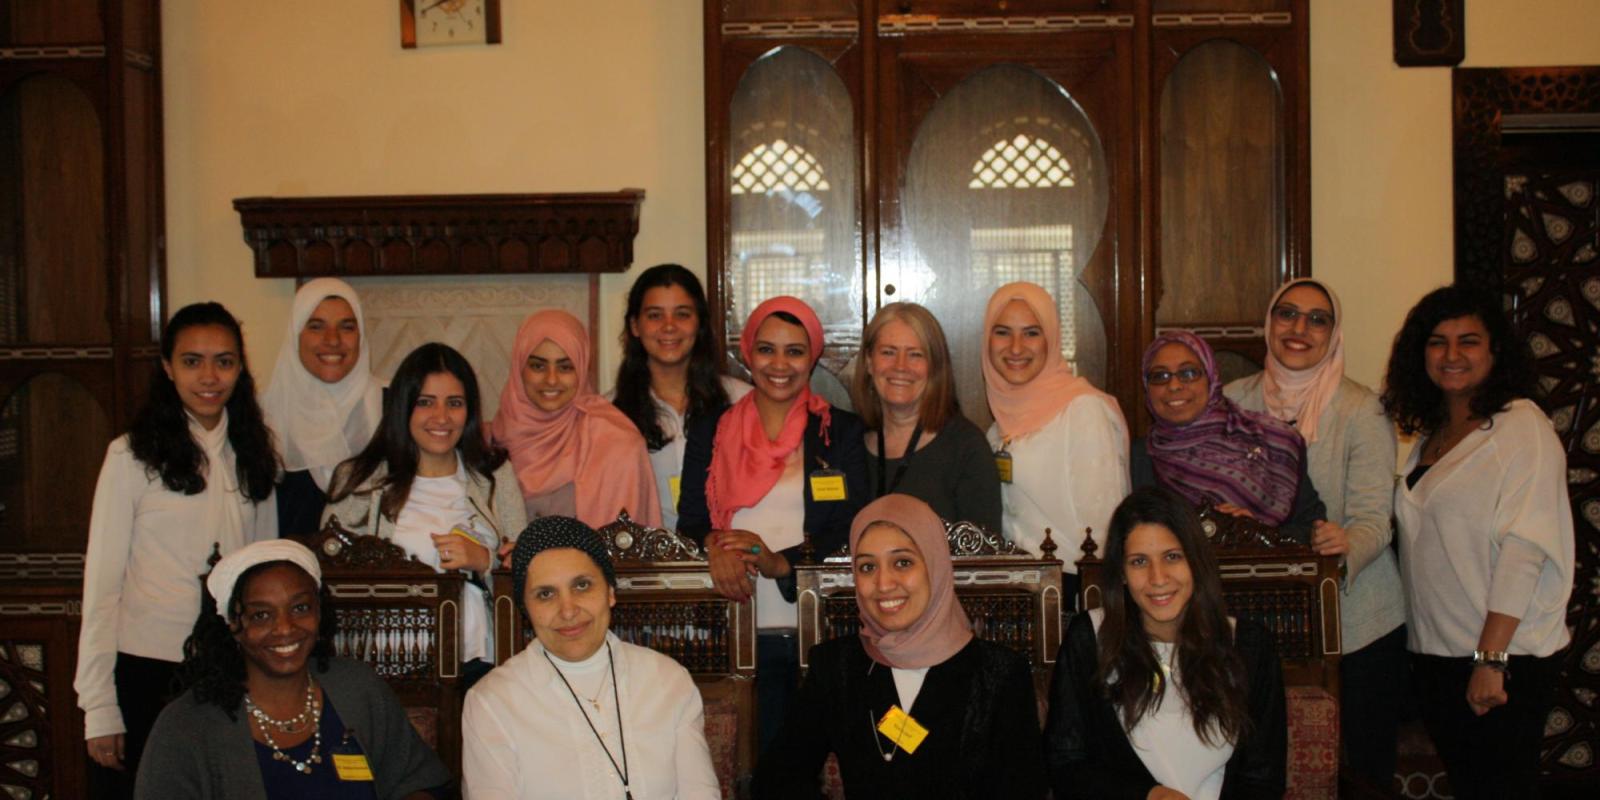 AUC hosted the first community psychology conference in the MENA region